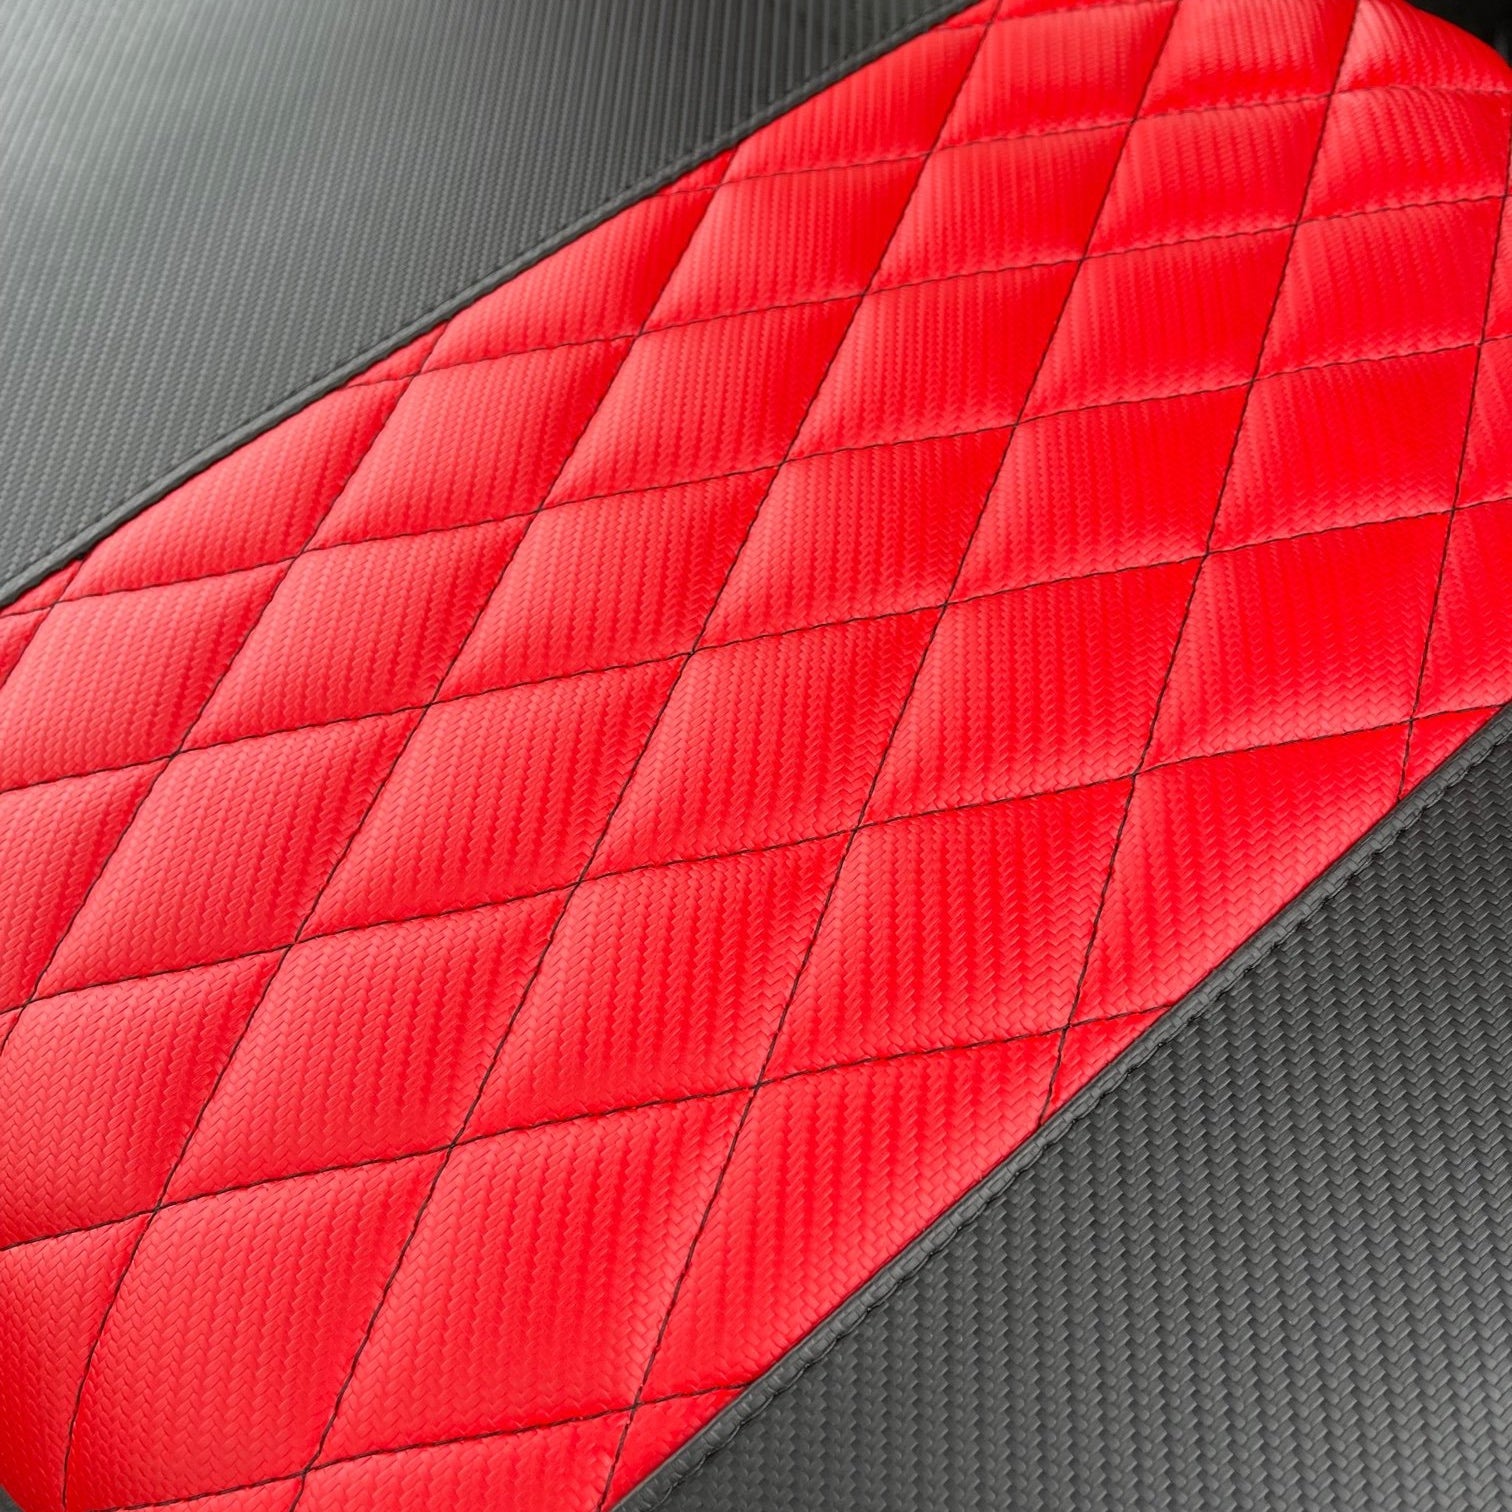 EZ-GO TXT 4 Passenger Seat Covers - Carbon Fiber and Diamond Carbon Fiber Red with Red Stitching